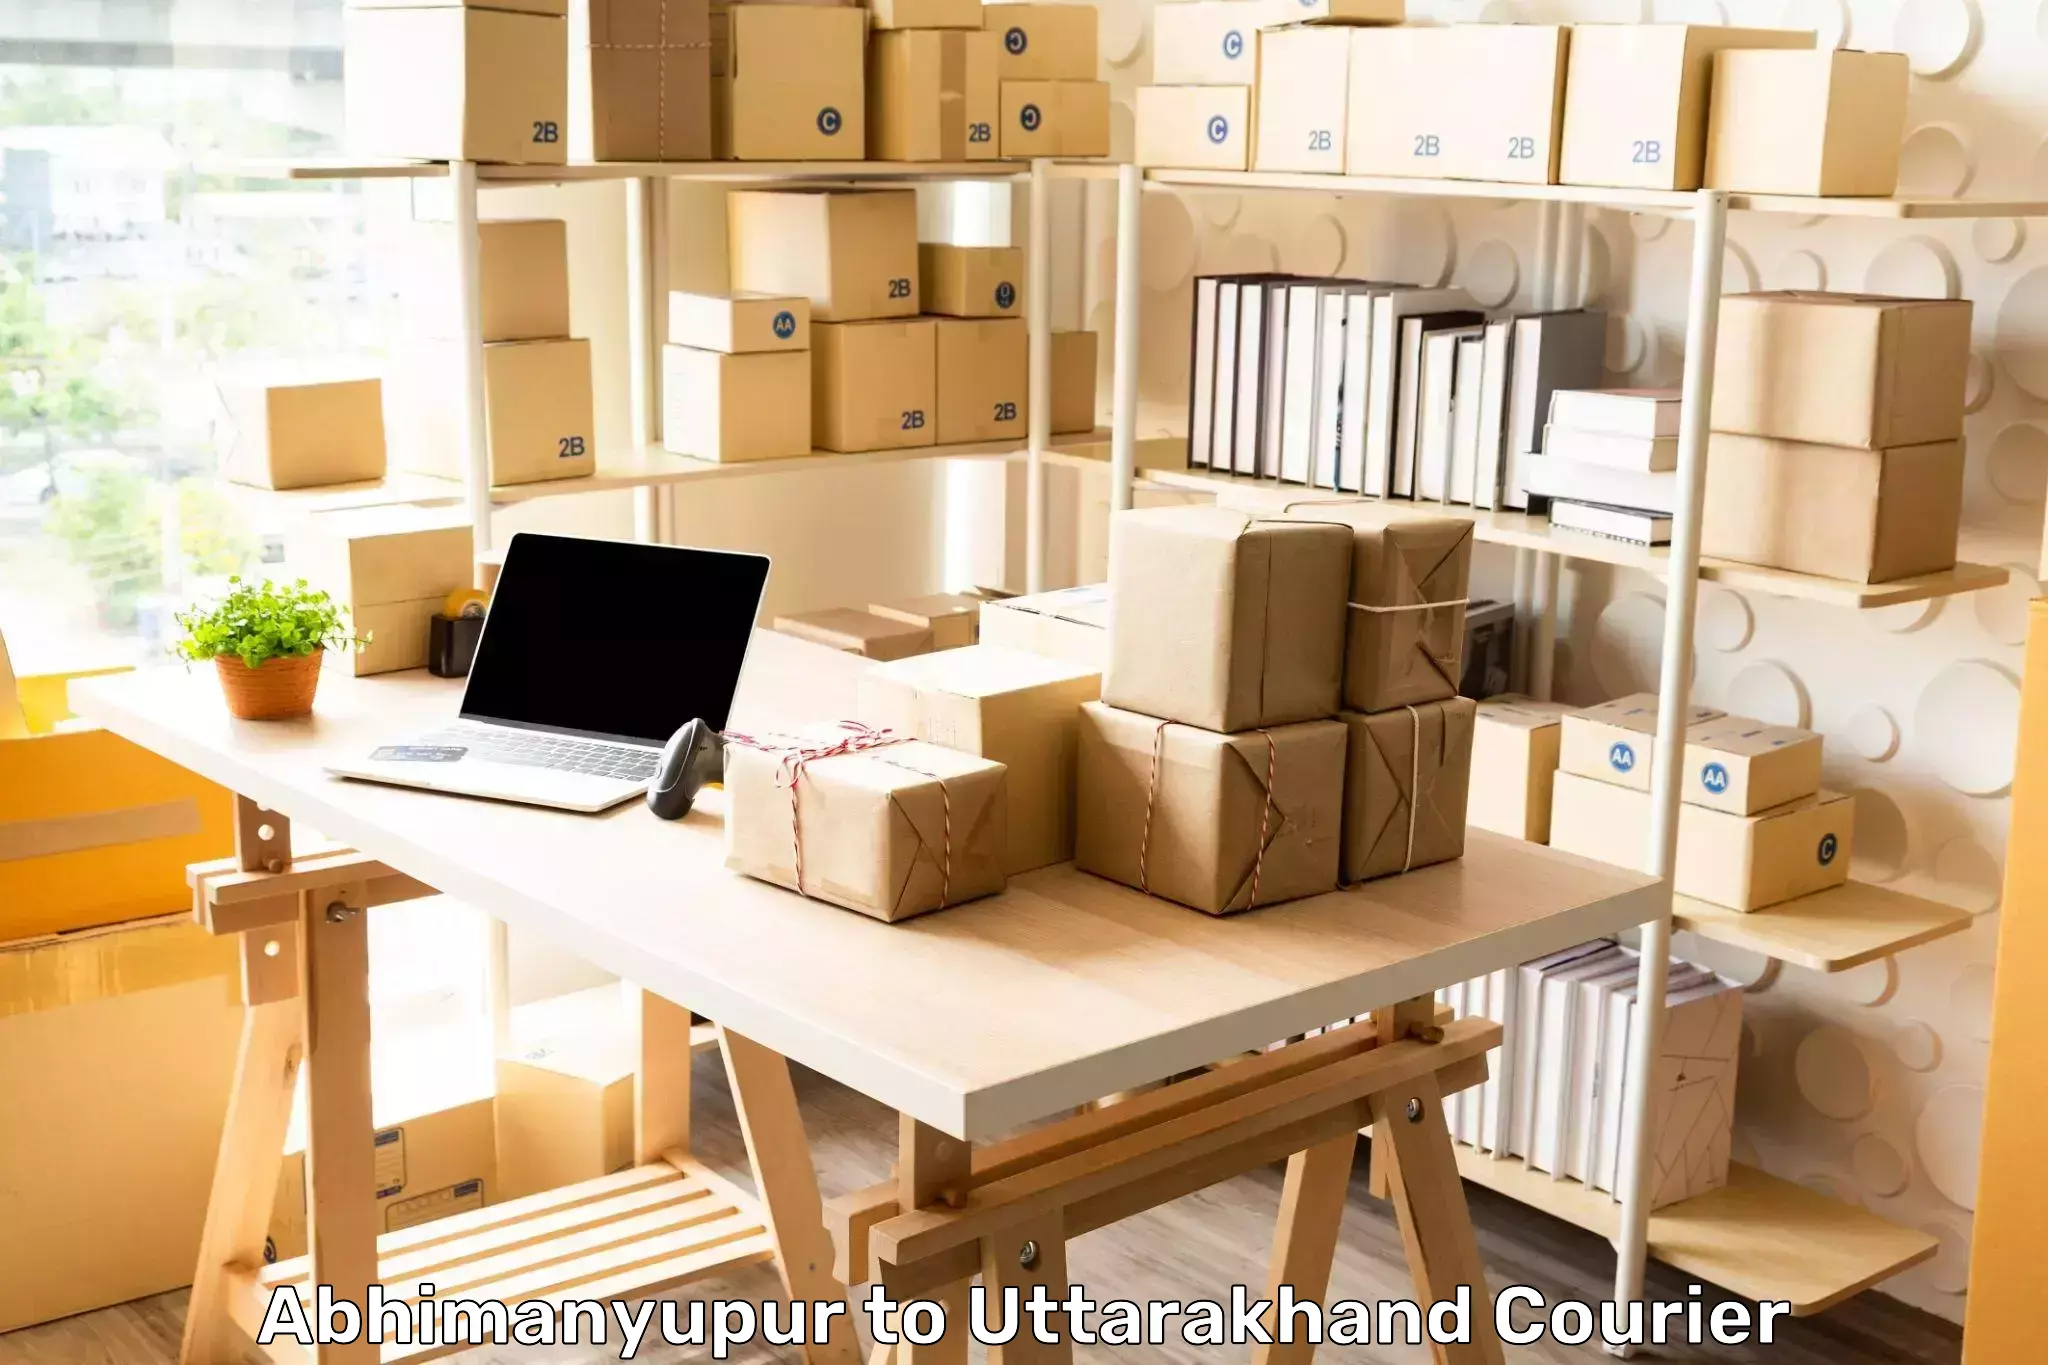 Flexible courier rates Abhimanyupur to Tehri